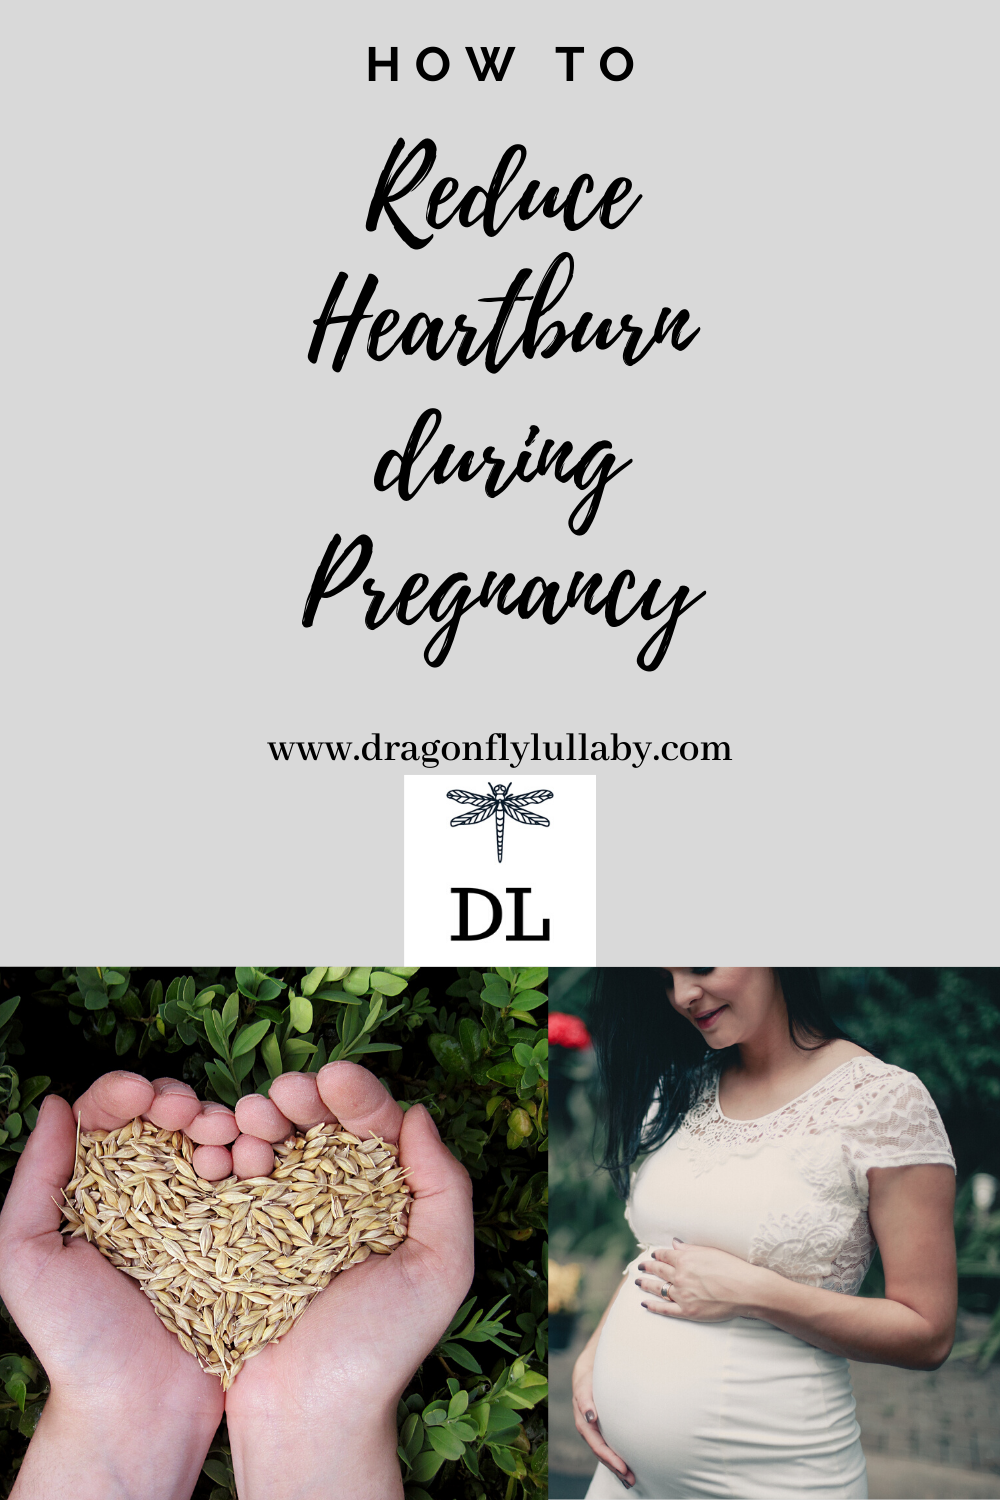 How to Reduce Heartburn During Pregnancy